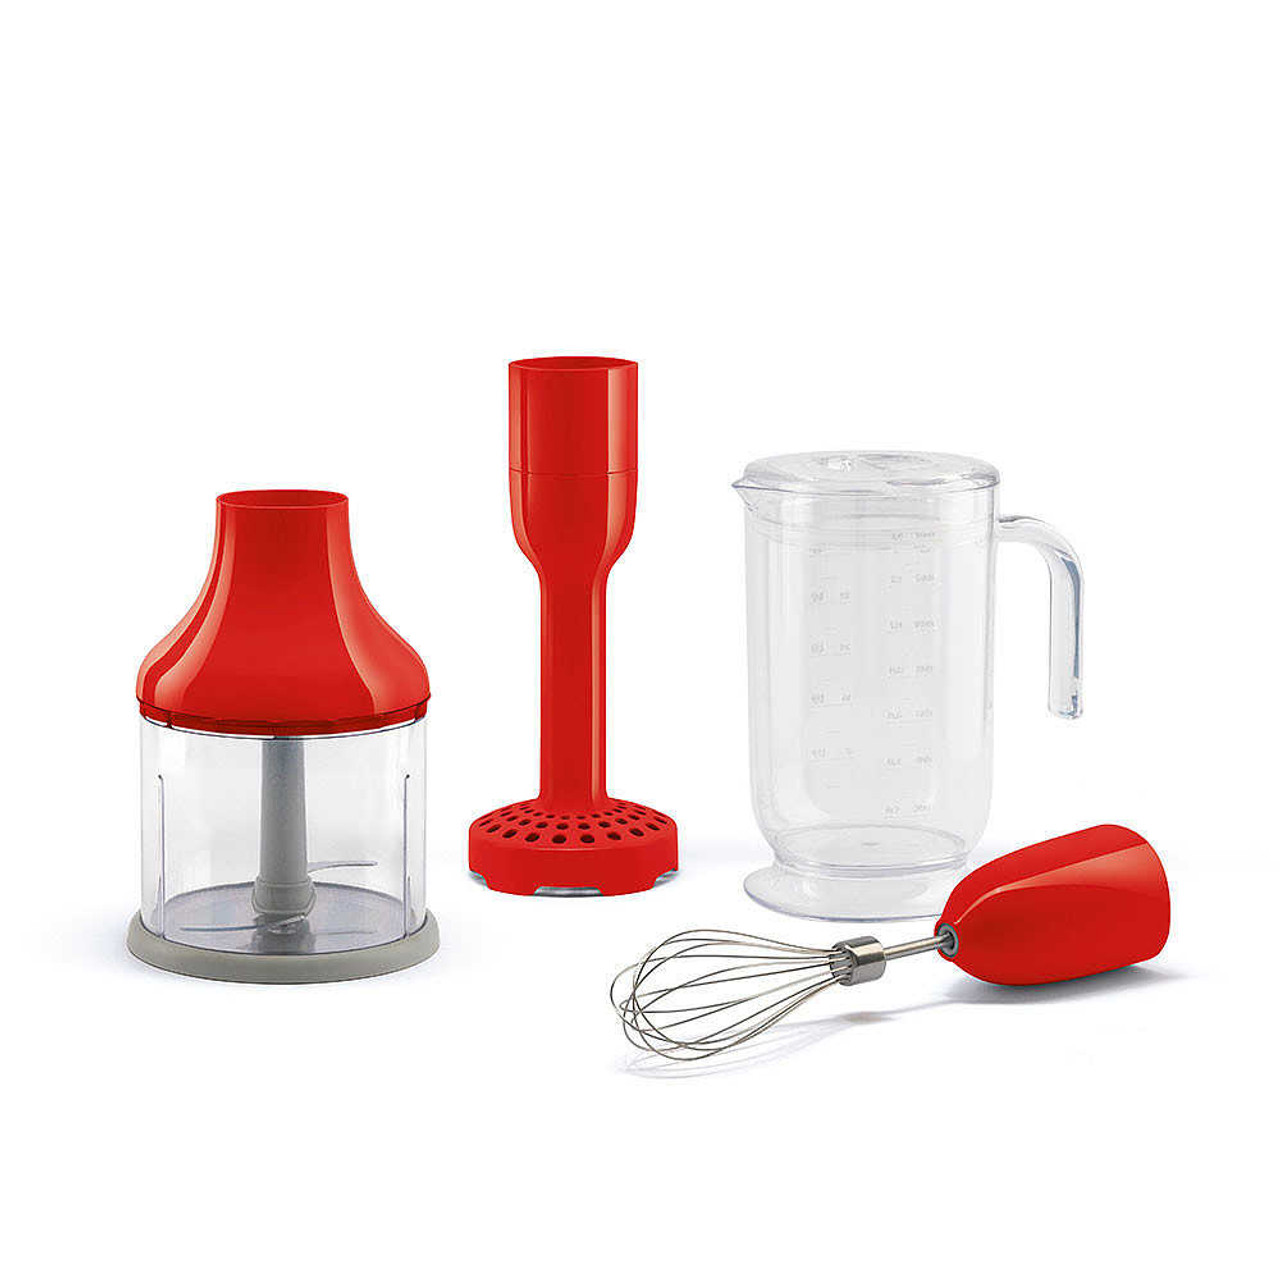 https://cdn11.bigcommerce.com/s-hccytny0od/images/stencil/1280x1280/products/4874/20257/SMEG_Hand_Blender_Attachments_in_Red__18944.1657201188.jpg?c=2?imbypass=on